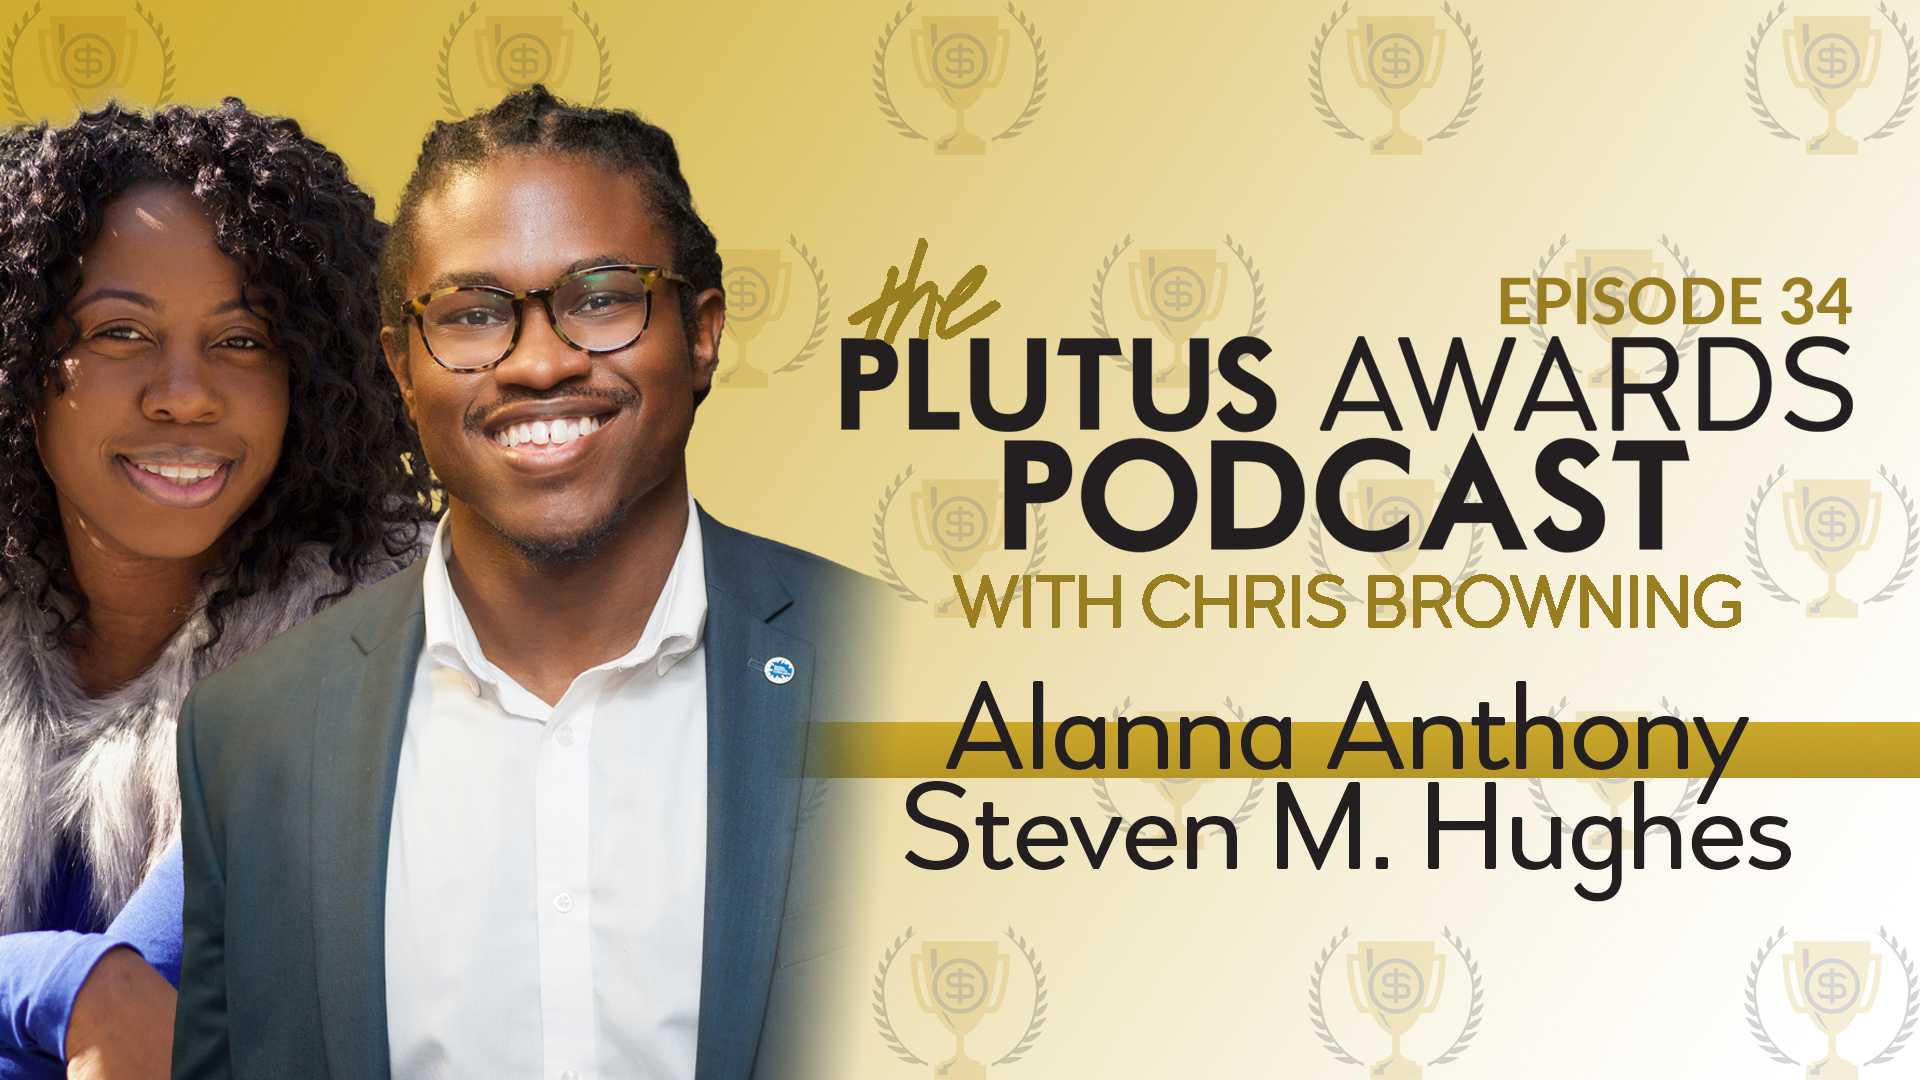 Plutus Awards Podcast - Alanna Anthony and Steven Hughes Featured Image